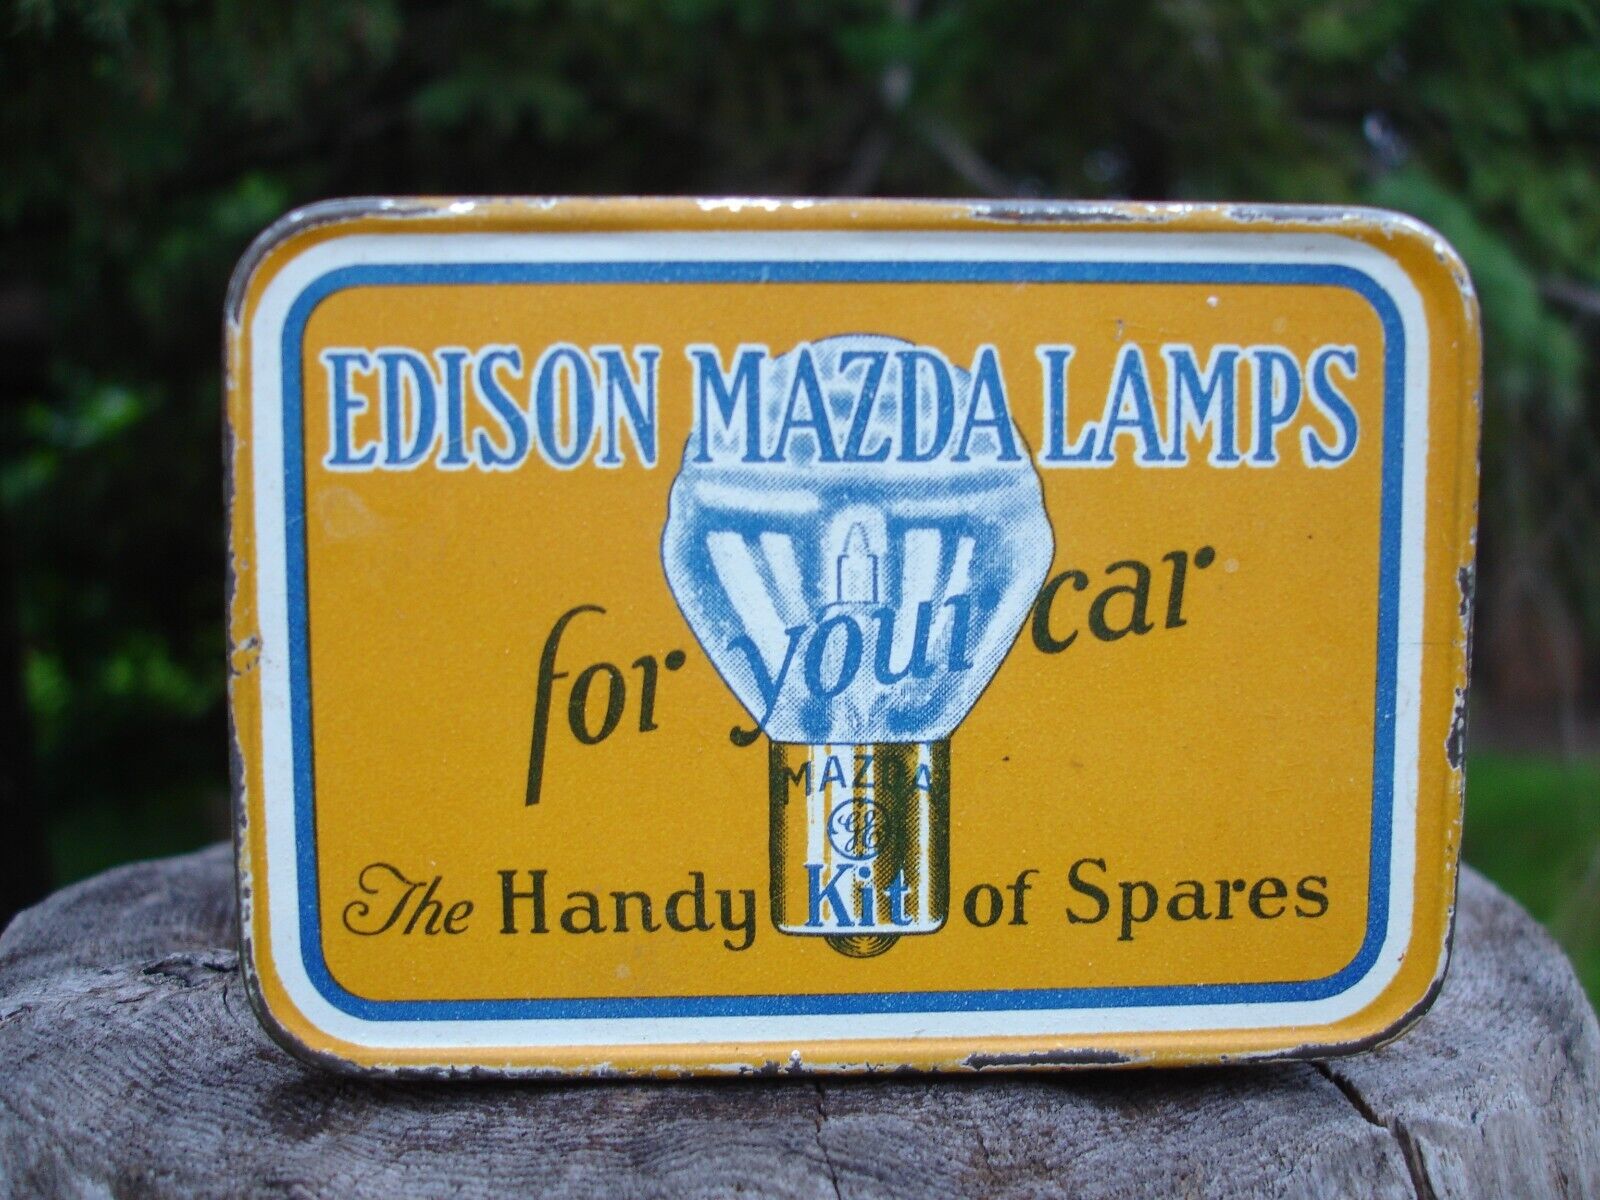 Vintage Edison Mazda Lamps For Your Car Tin Nice